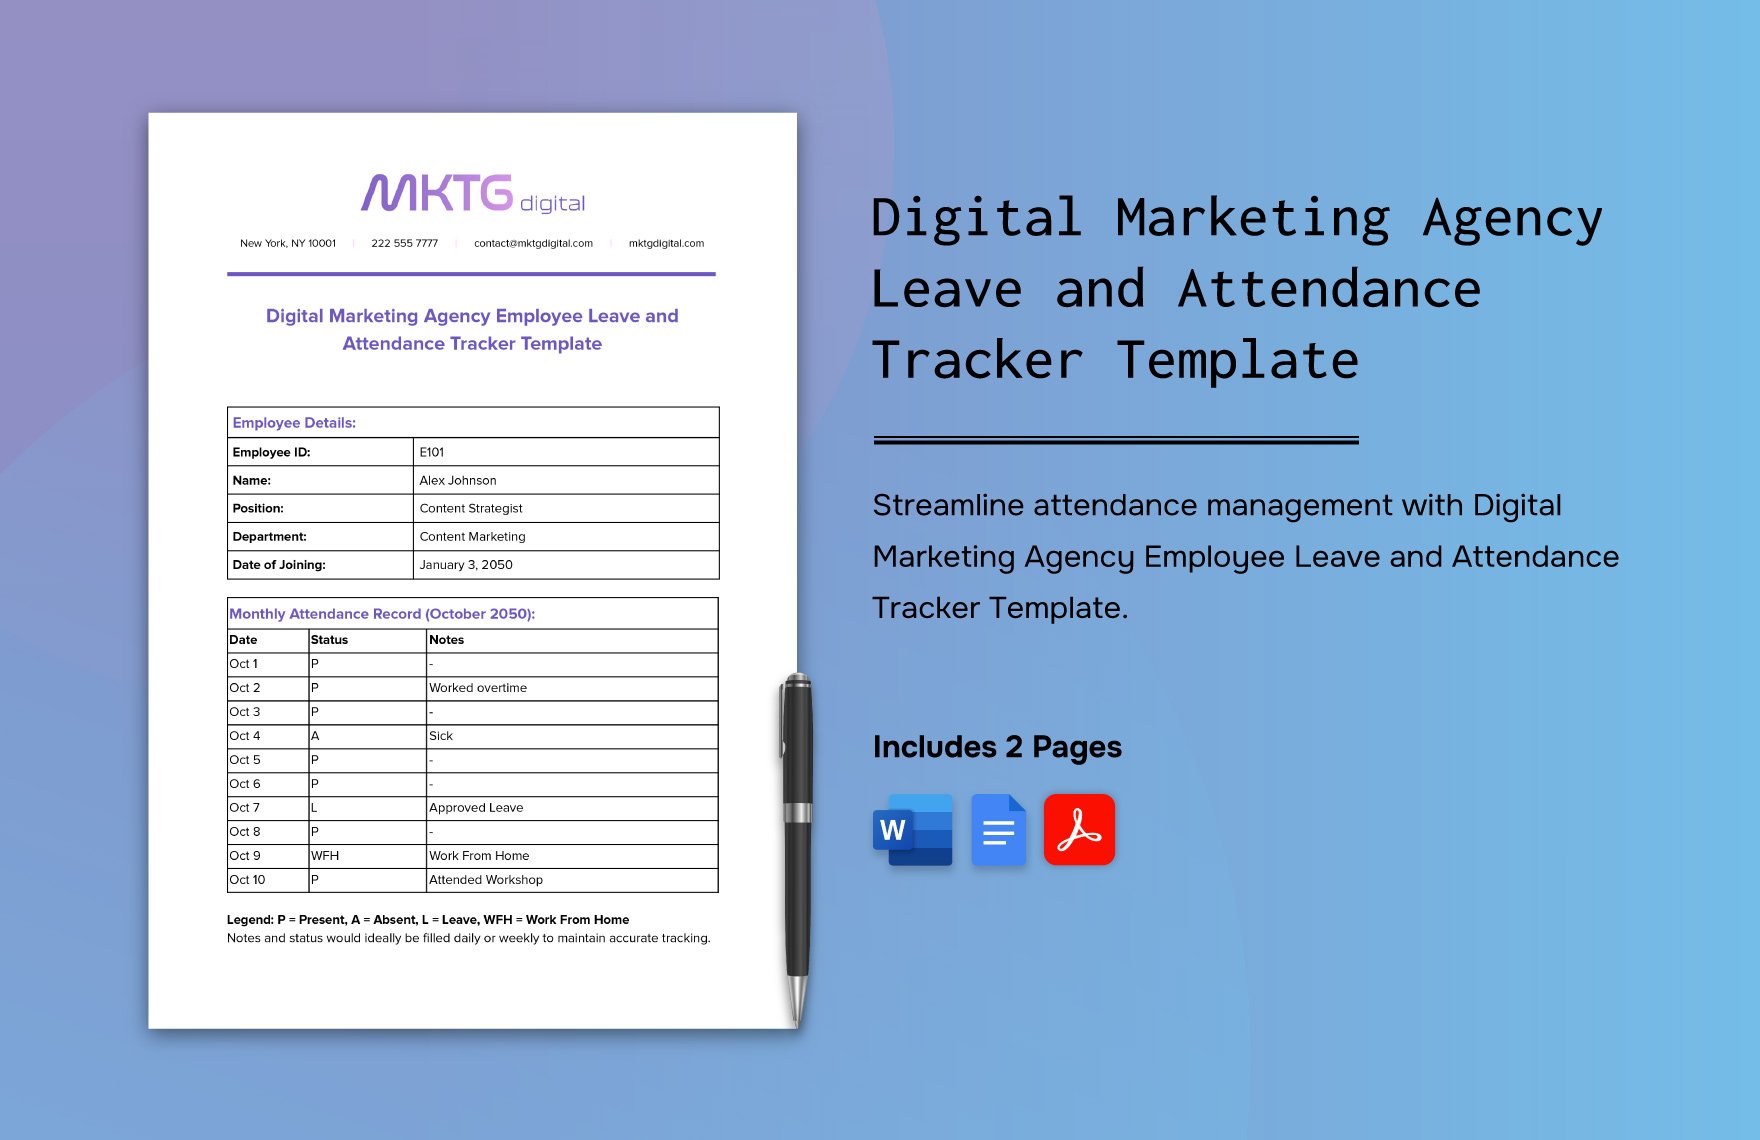 Digital Marketing Agency Employee Leave and Attendance Tracker Template